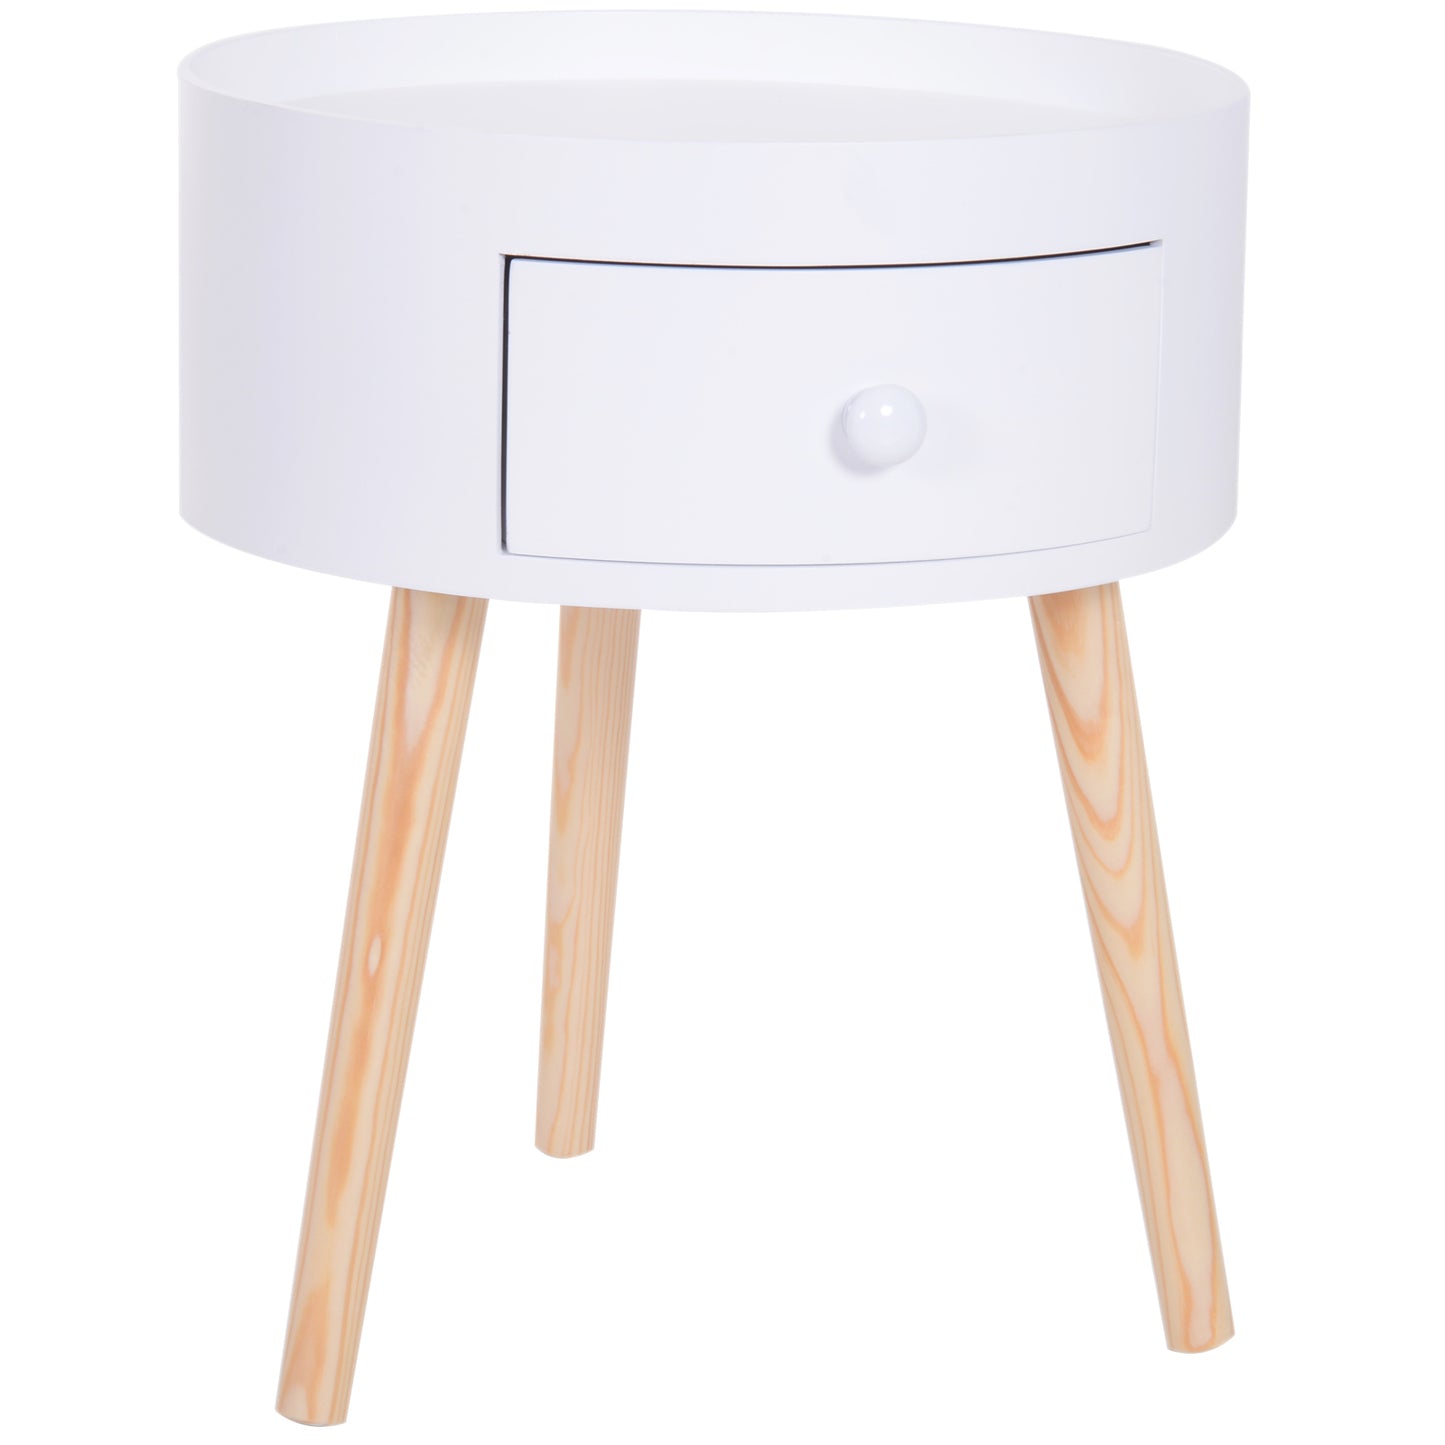 HOMCOM Modern Side Table, Small Coffee Table, Round Bedside Table with Drawer and Wood Legs for Living Room, Bedroom, White